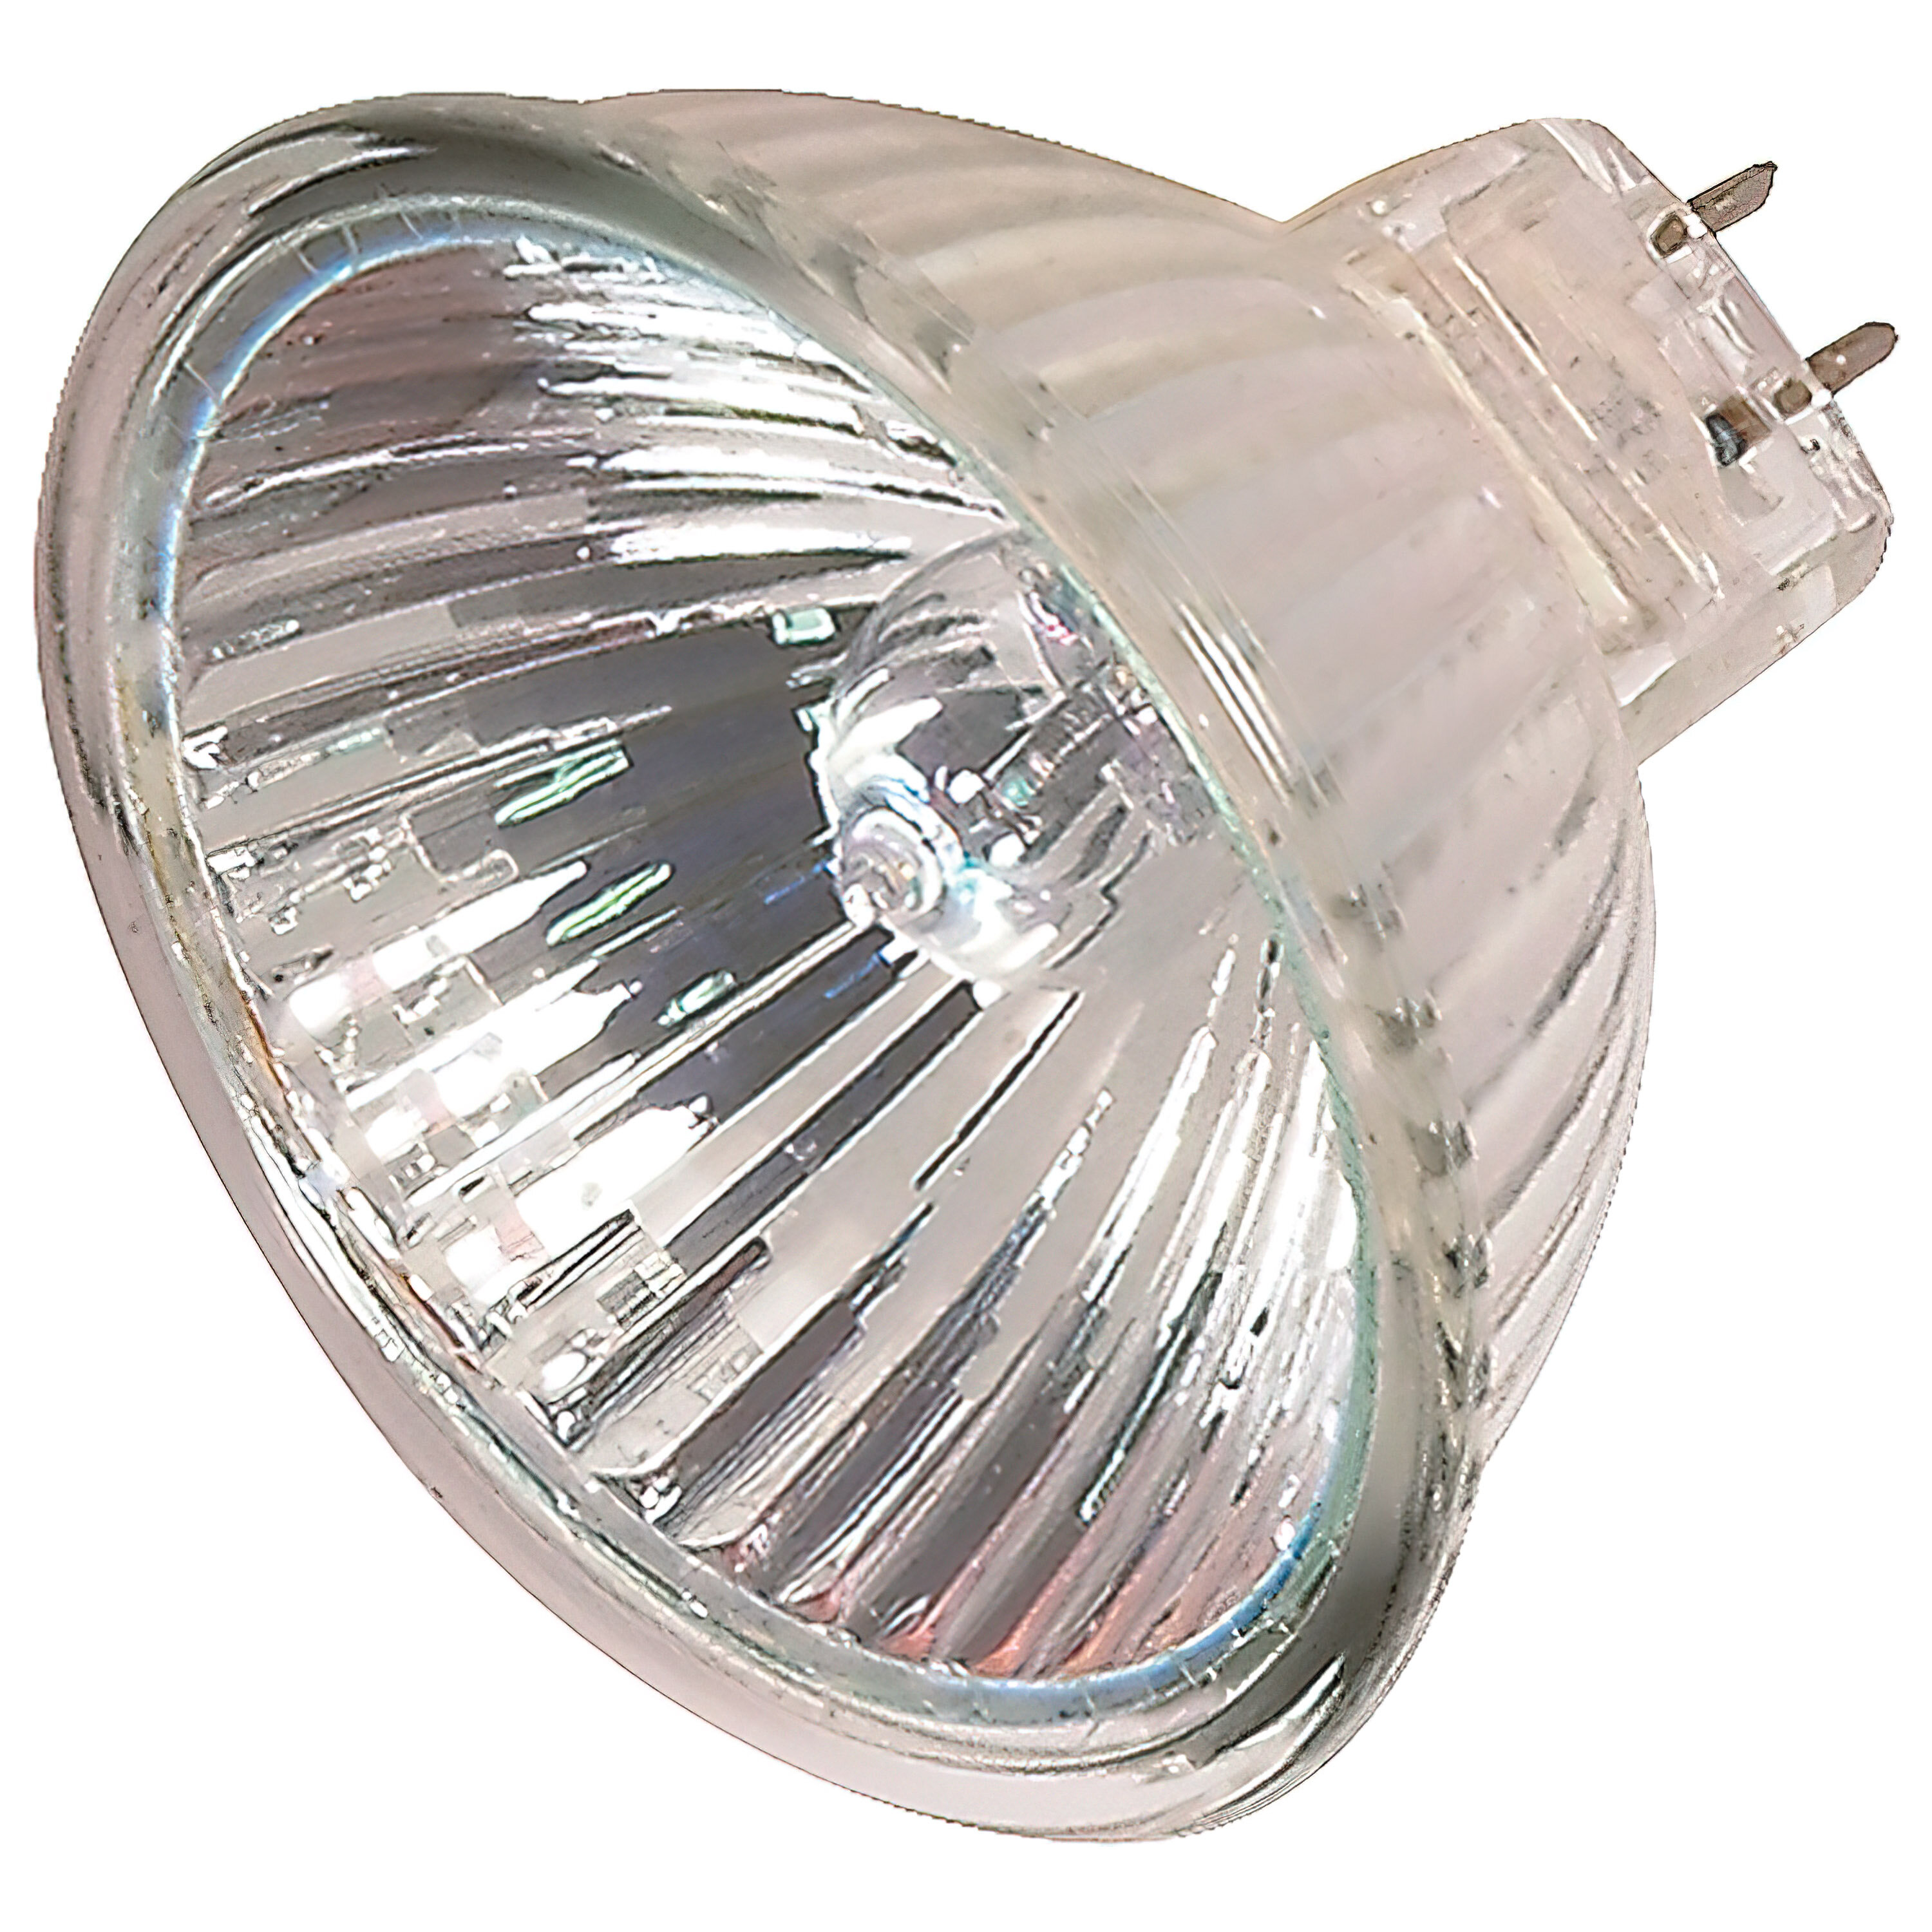 MR16 Bulb, 6 Packs of MR16 Halogen Bulb 20w 12V, Long-Life 12v Gu5.3 Double  Pin Base, 2700k Warm White Light Dimmable, with Transparent Glass Cover